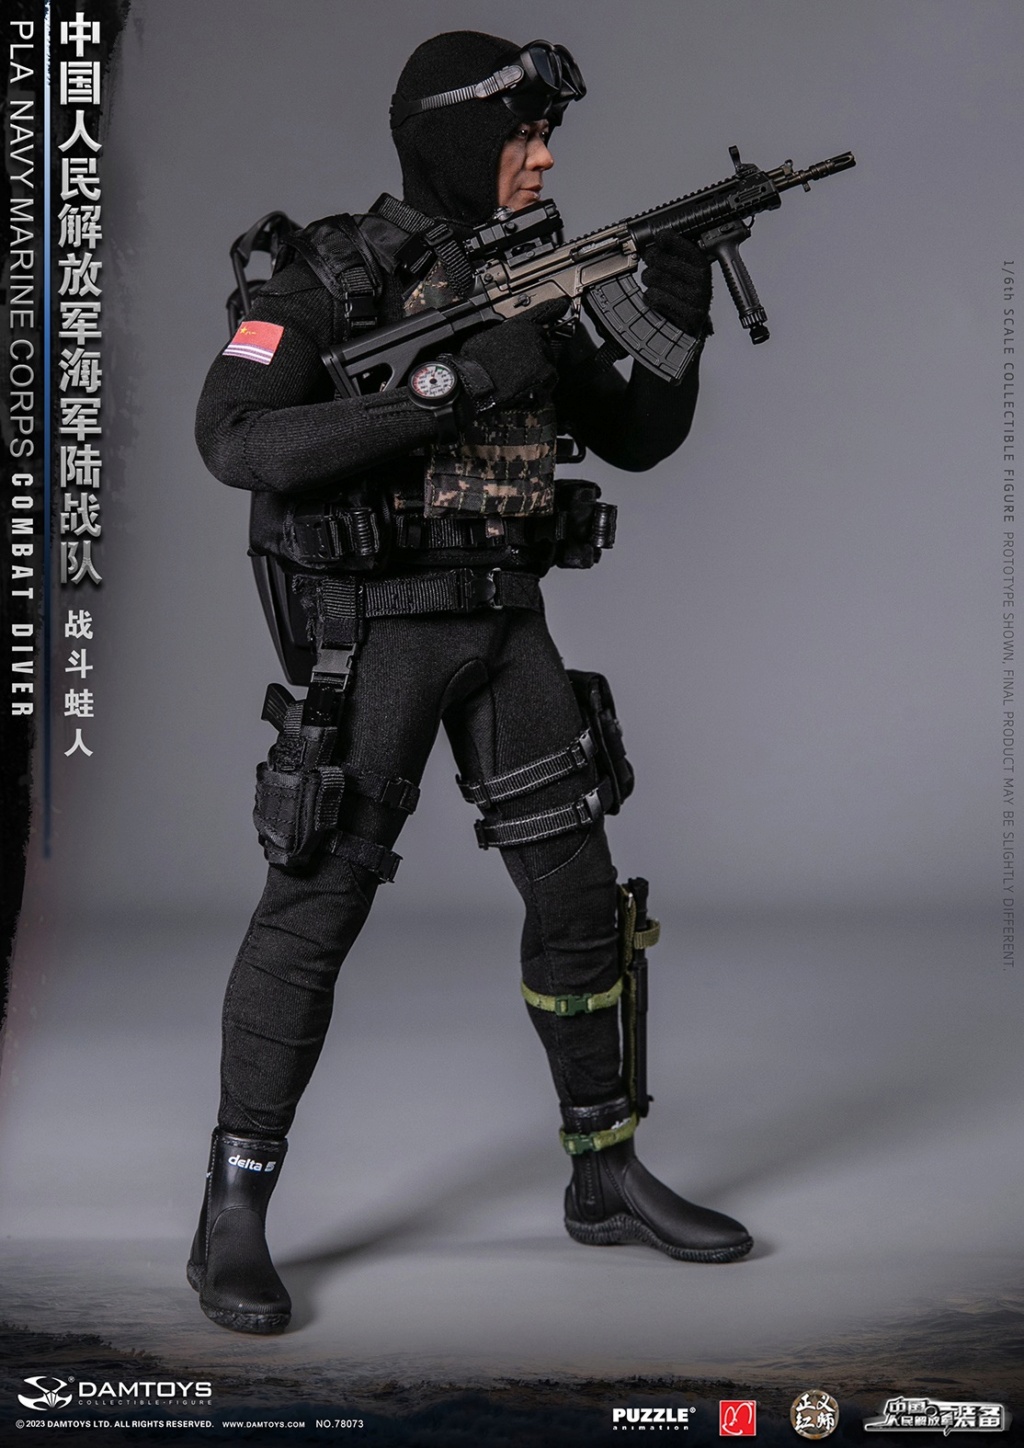 newproduct - NEW PRODUCT: DAMToys: 1/6 Chinese People's Liberation Army Marine Corps - Combat Frogman Action Figure #78073 14302512